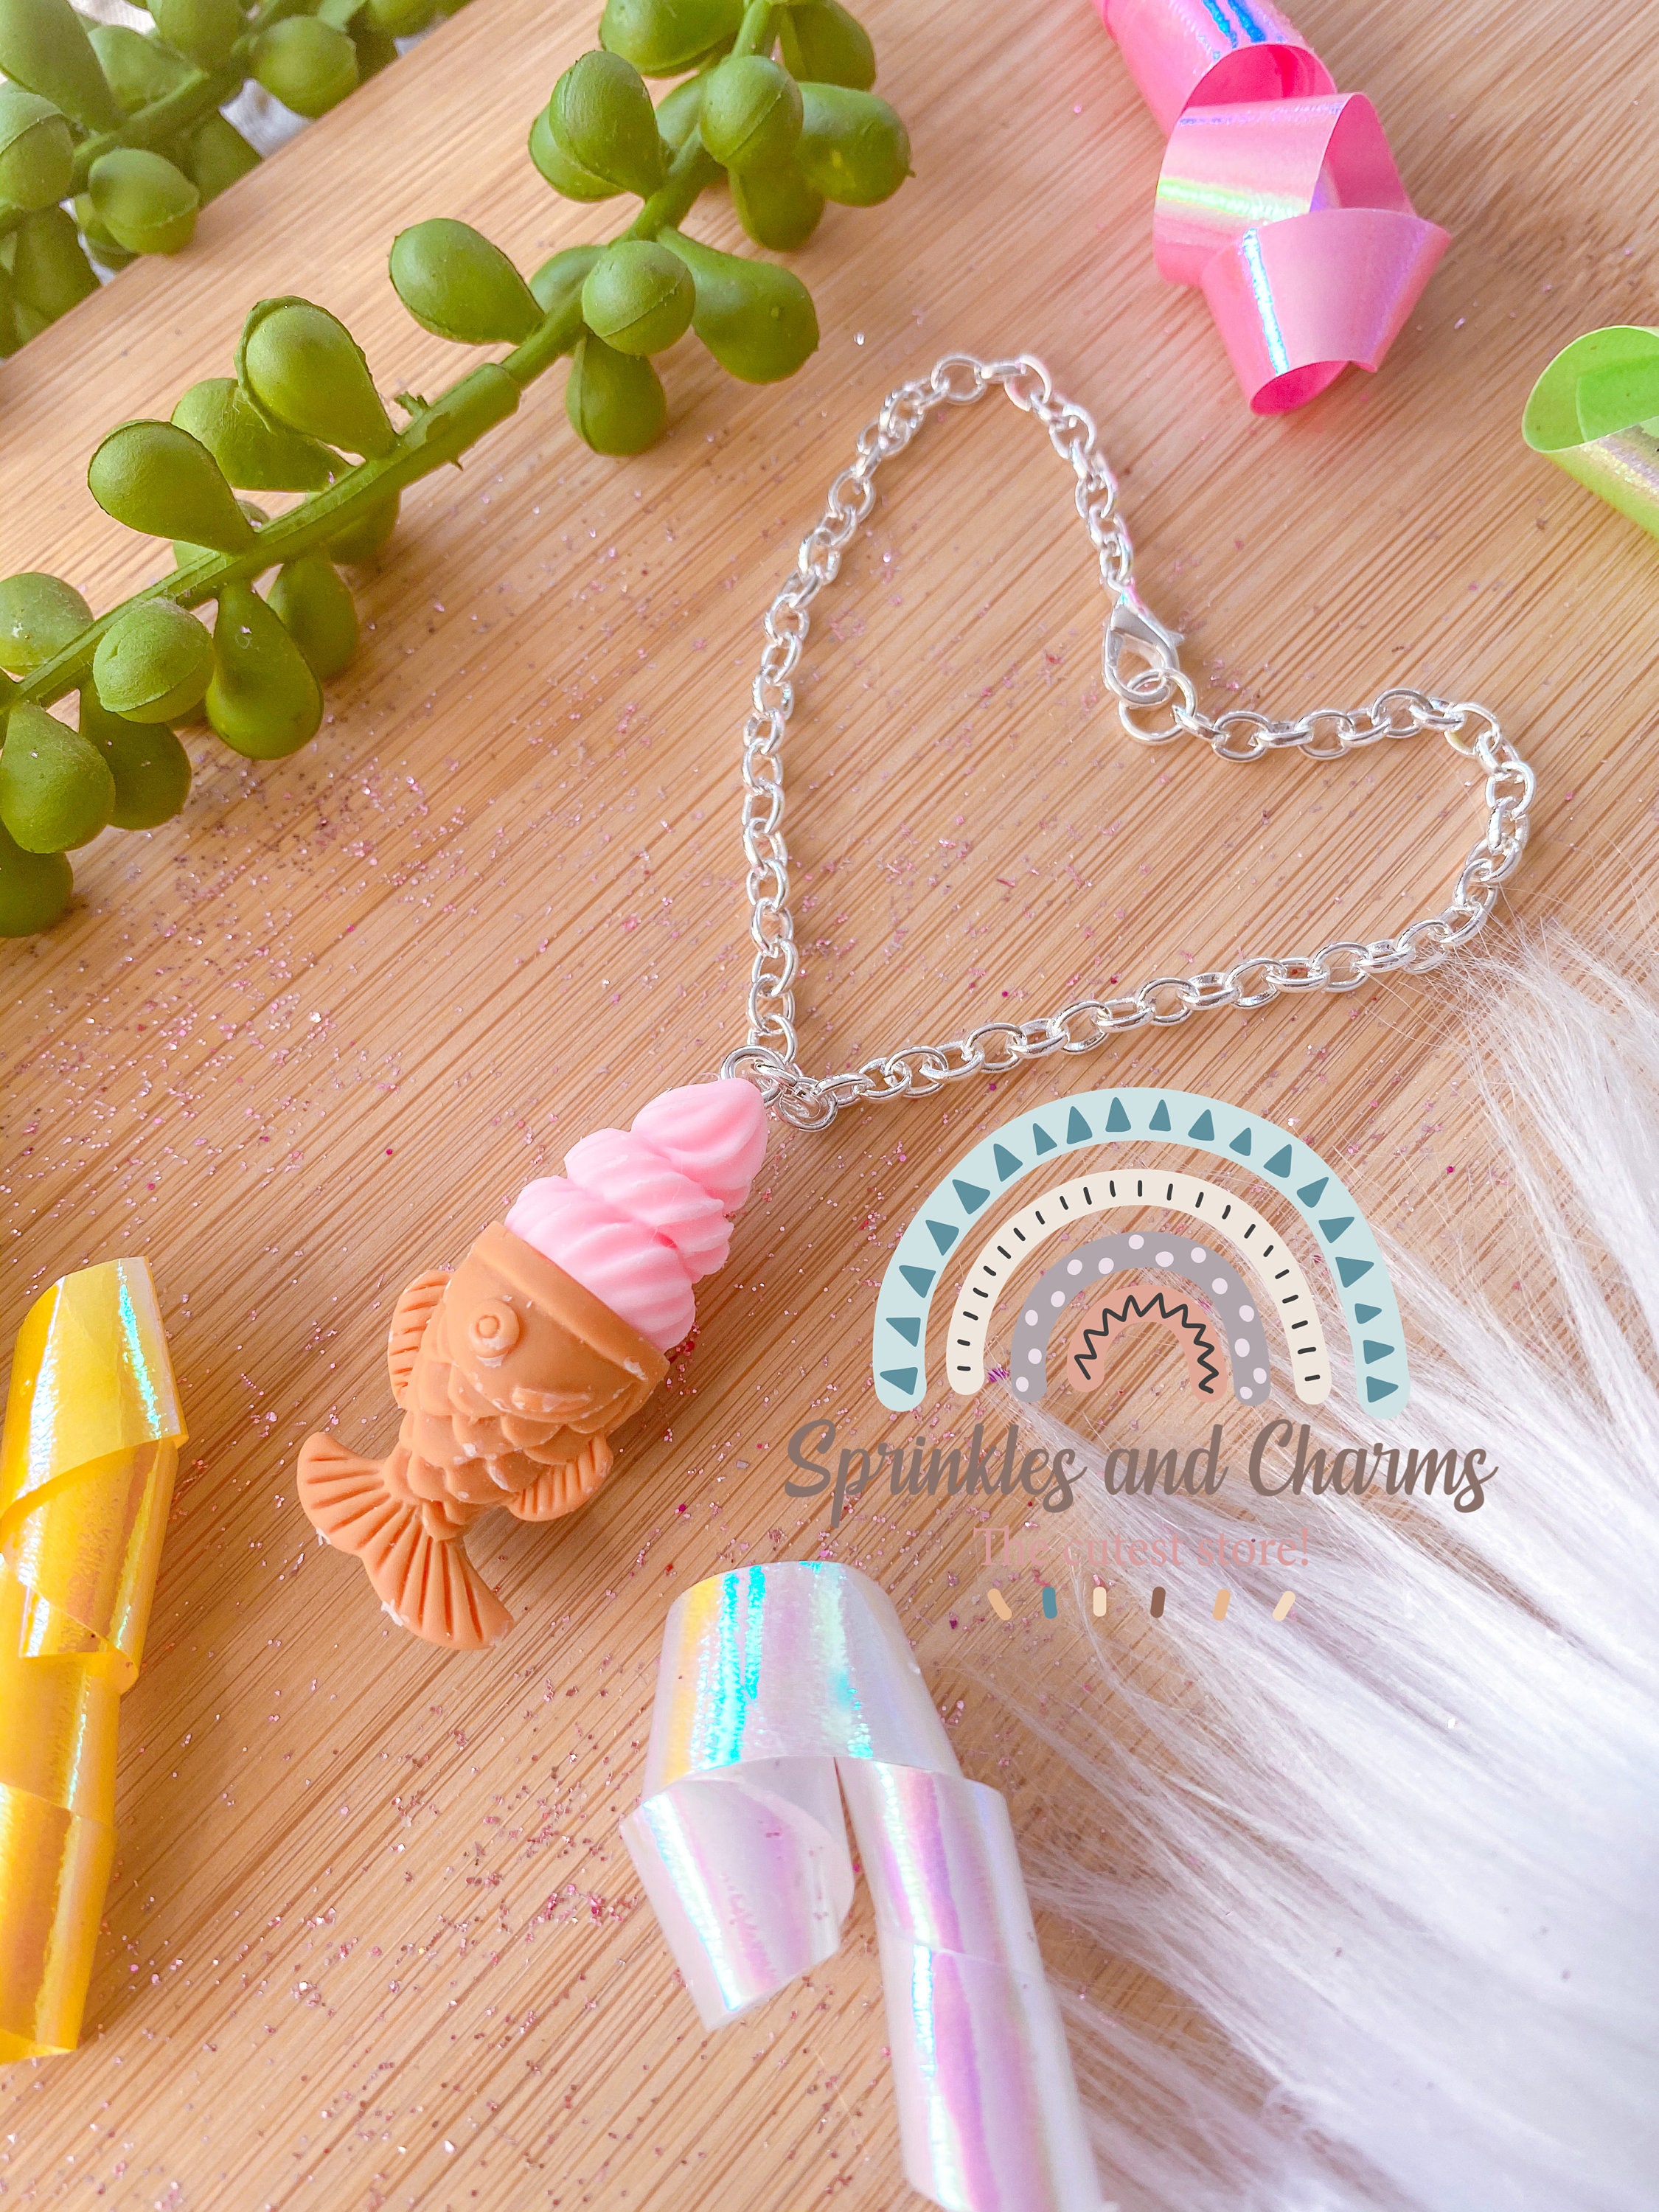 Polymer Clay Kawaii Charms · A Piece Of Clay Food · Jewelry Making,  Molding, and Decorating on Cut Out + Keep